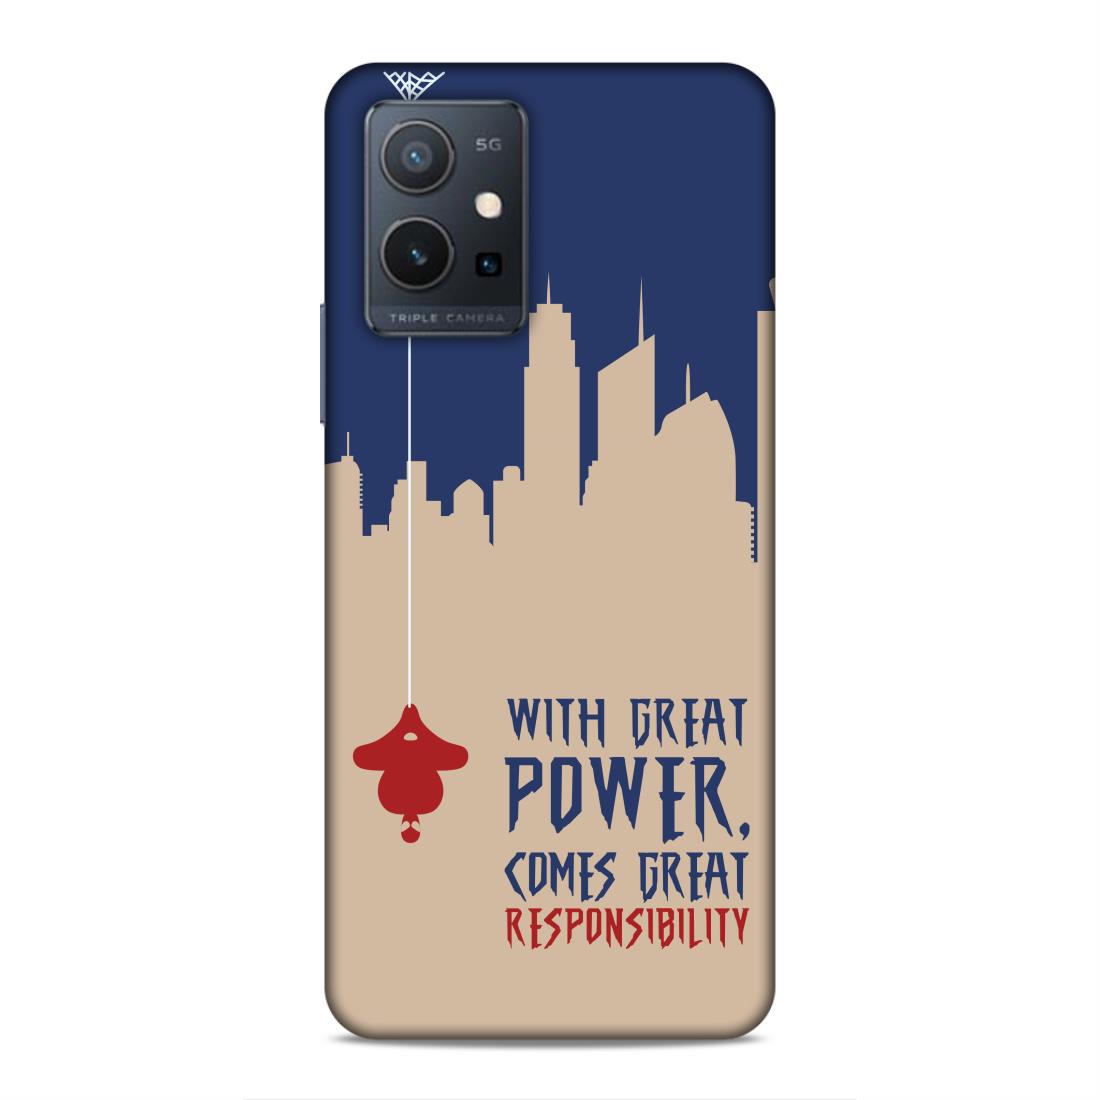 Great Power Comes Great Responsibility Hard Back Case For Vivo T1 5G / Y75 5G